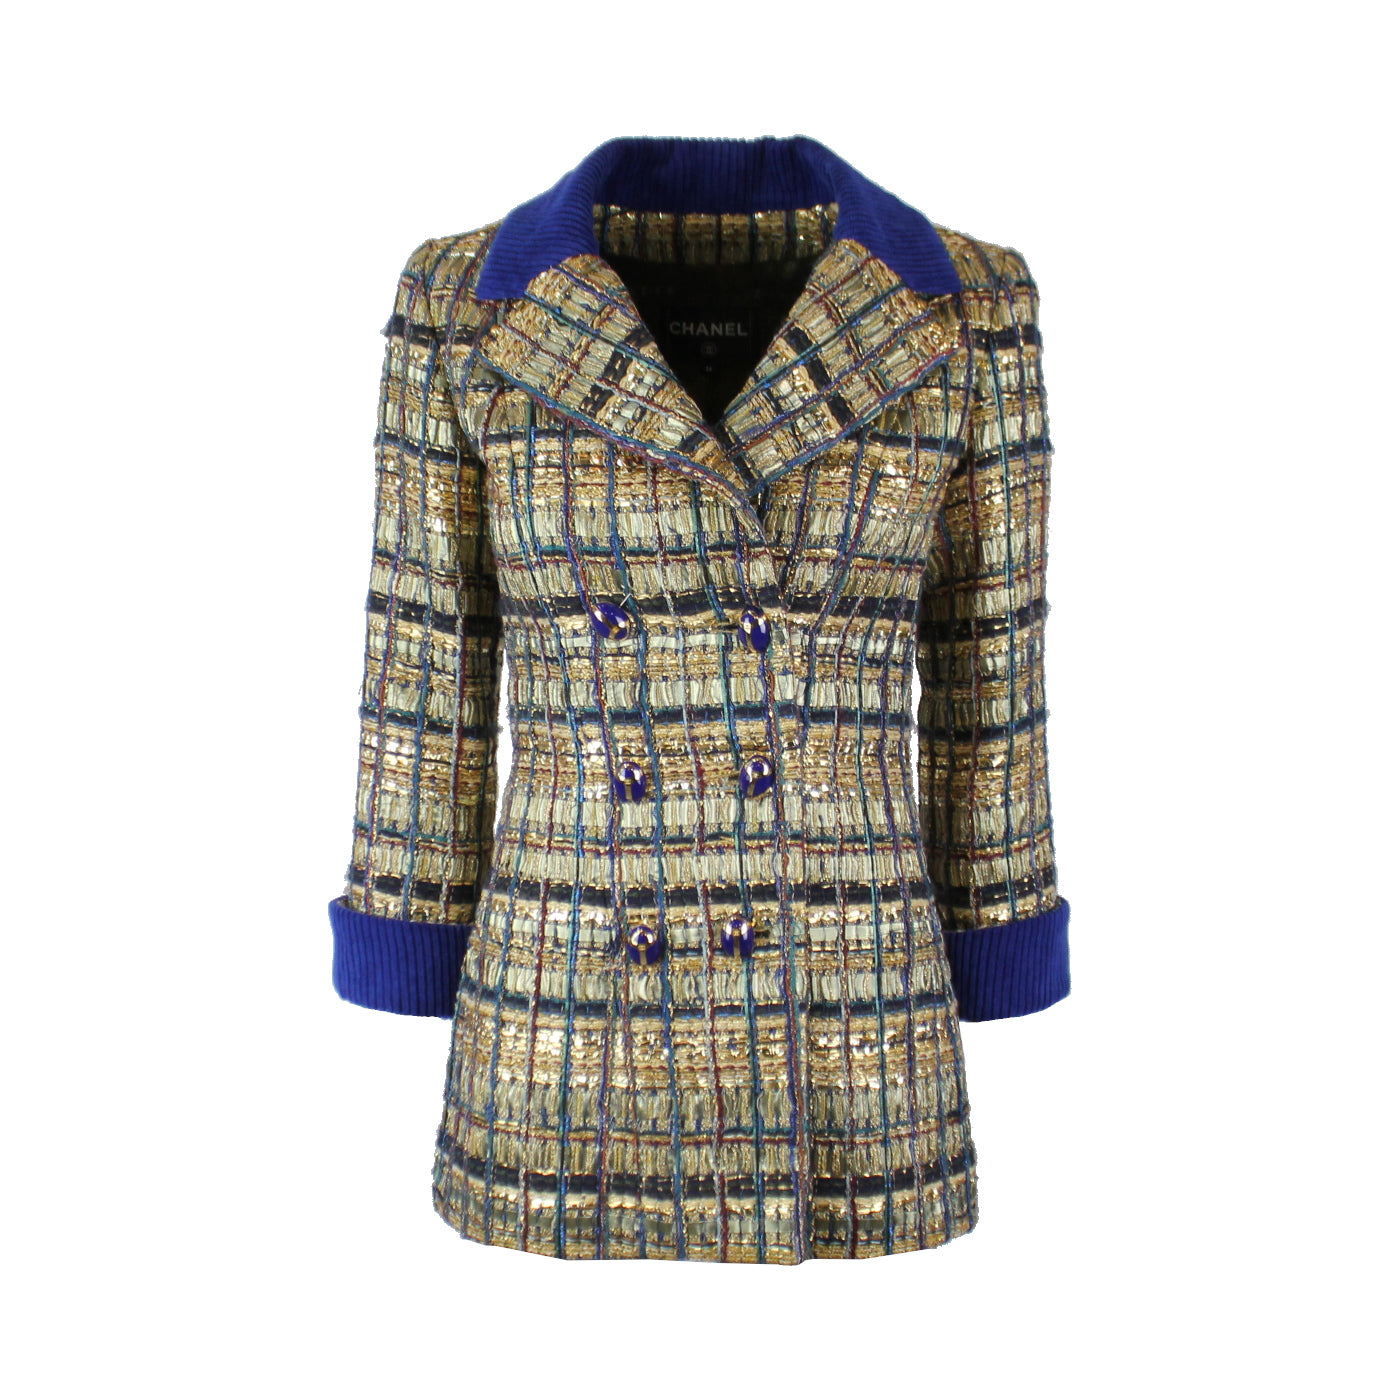 CHANEL EGYPT COLLECTION GOLD RUNWAY TWEED JACKET